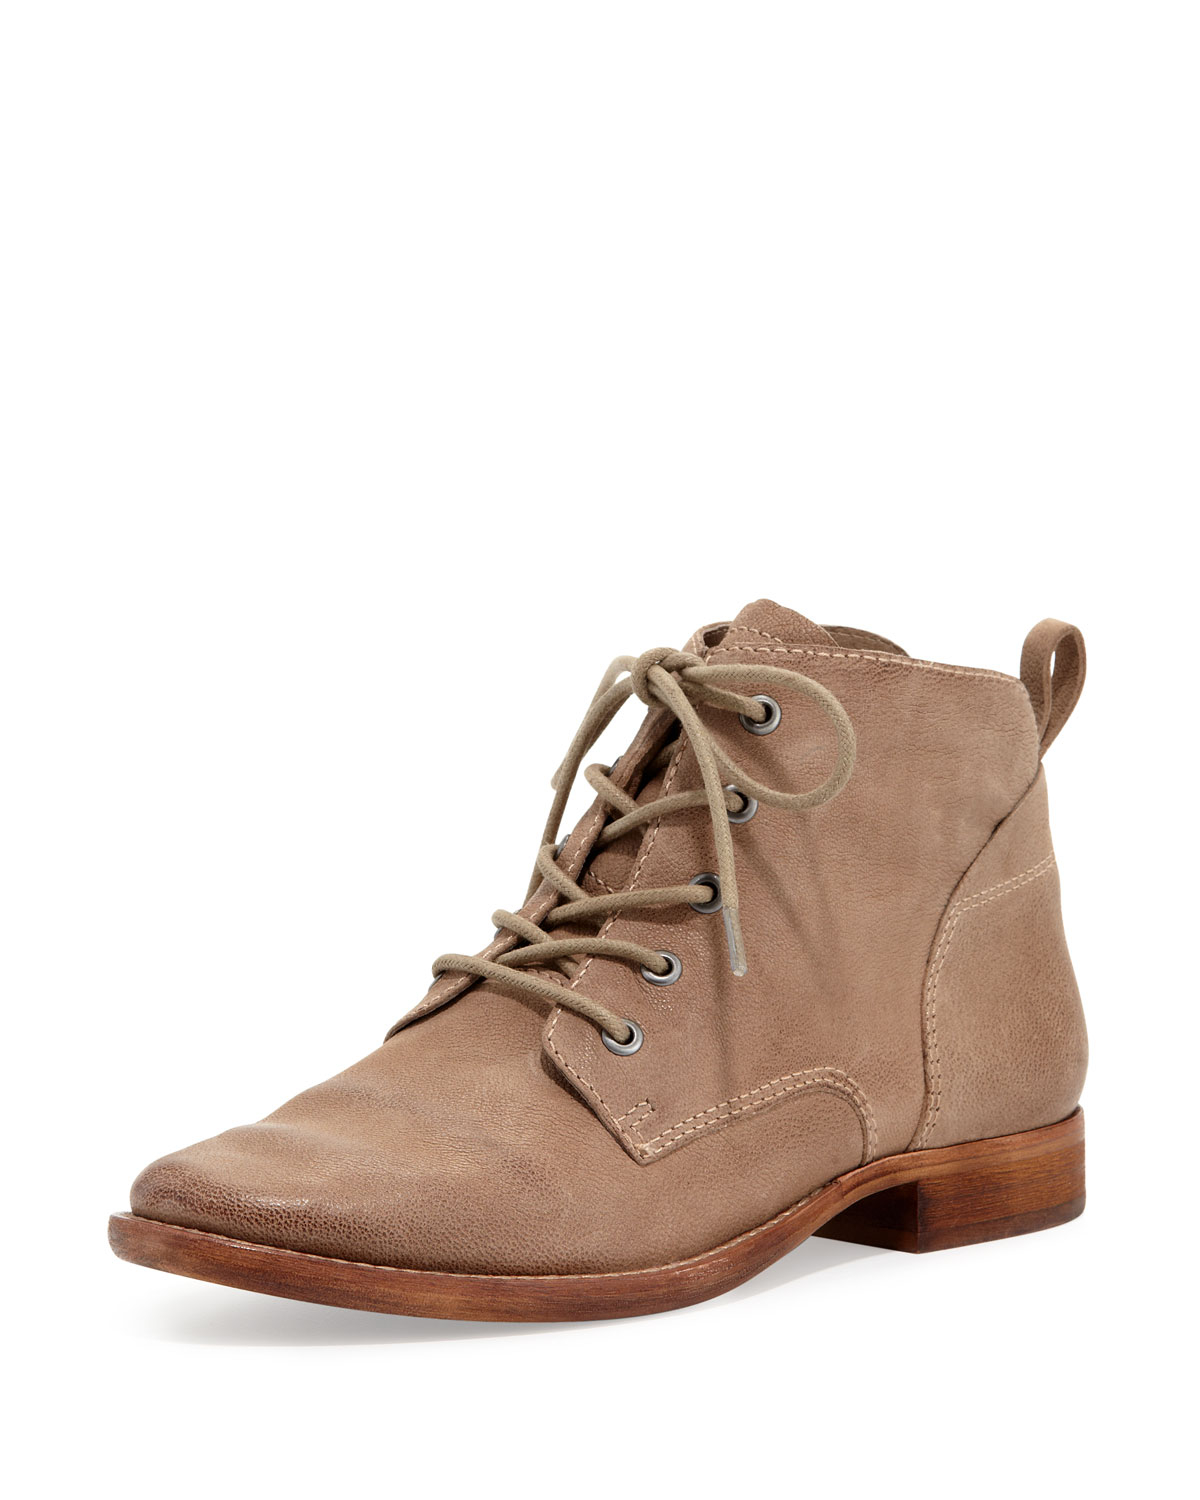 Sam edelman Mare Lace-up Bootie in Brown | Lyst